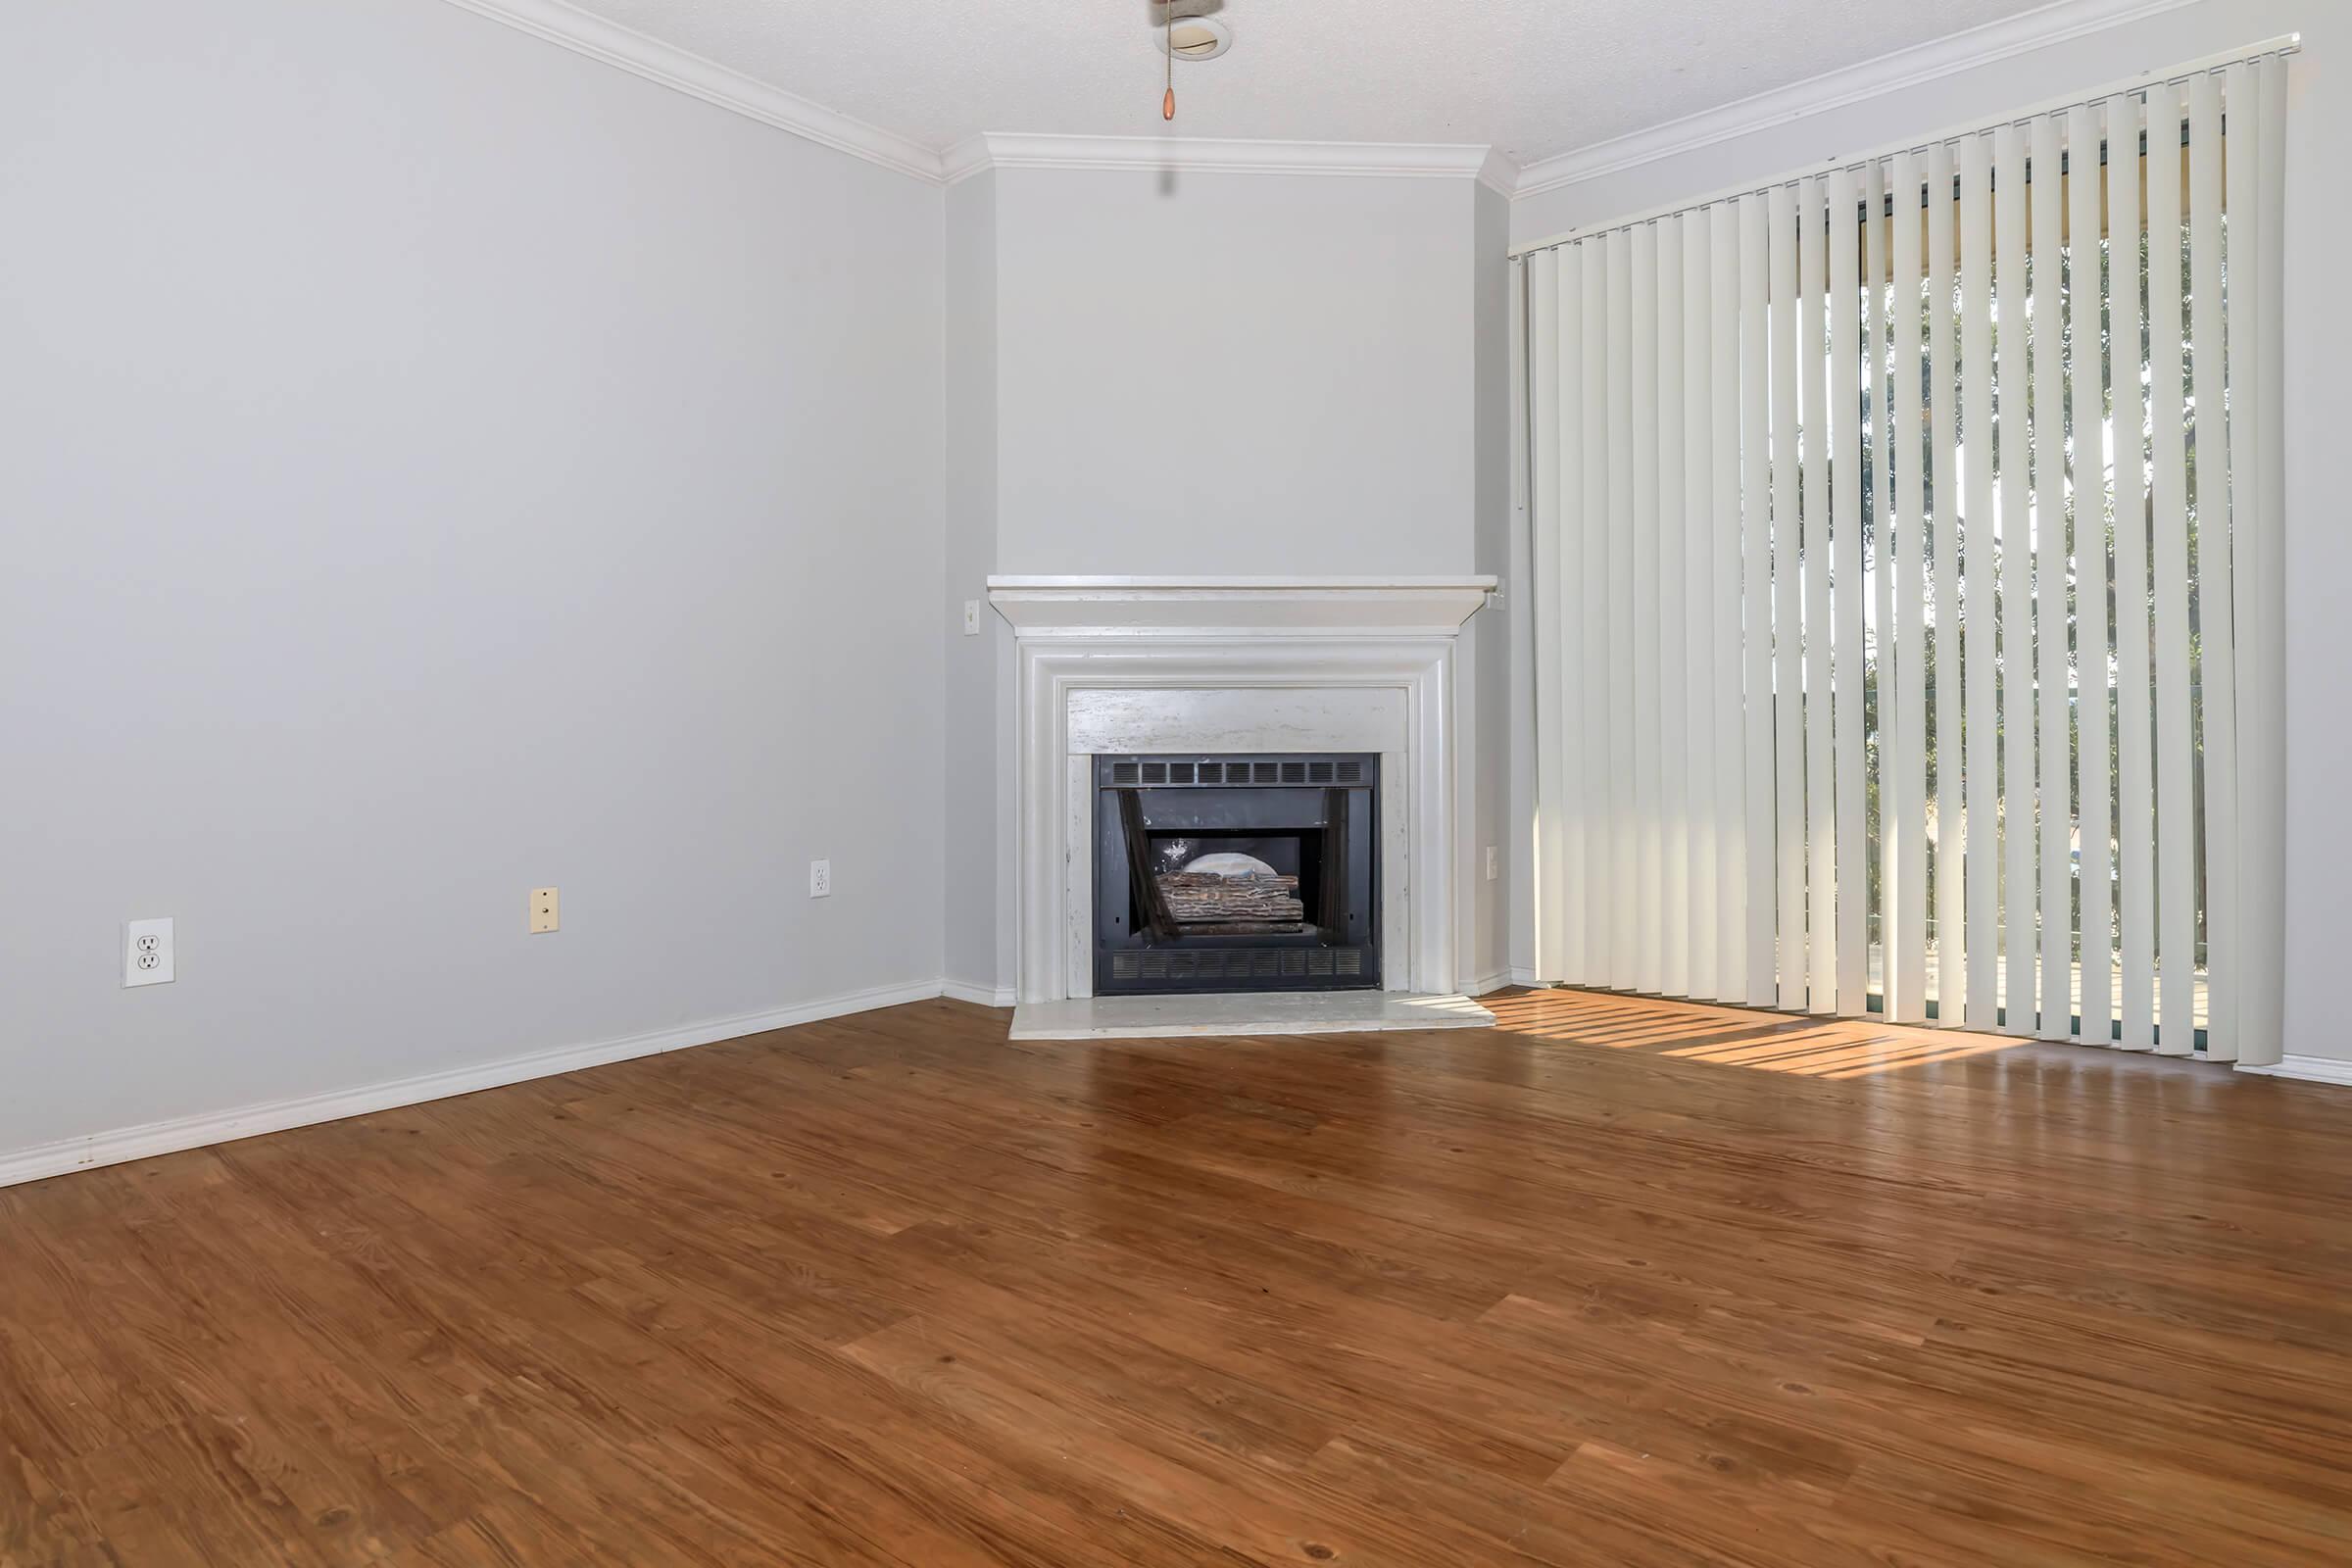 FLOOR PLAN B-1 WITH COZY GAS FIREPLACE